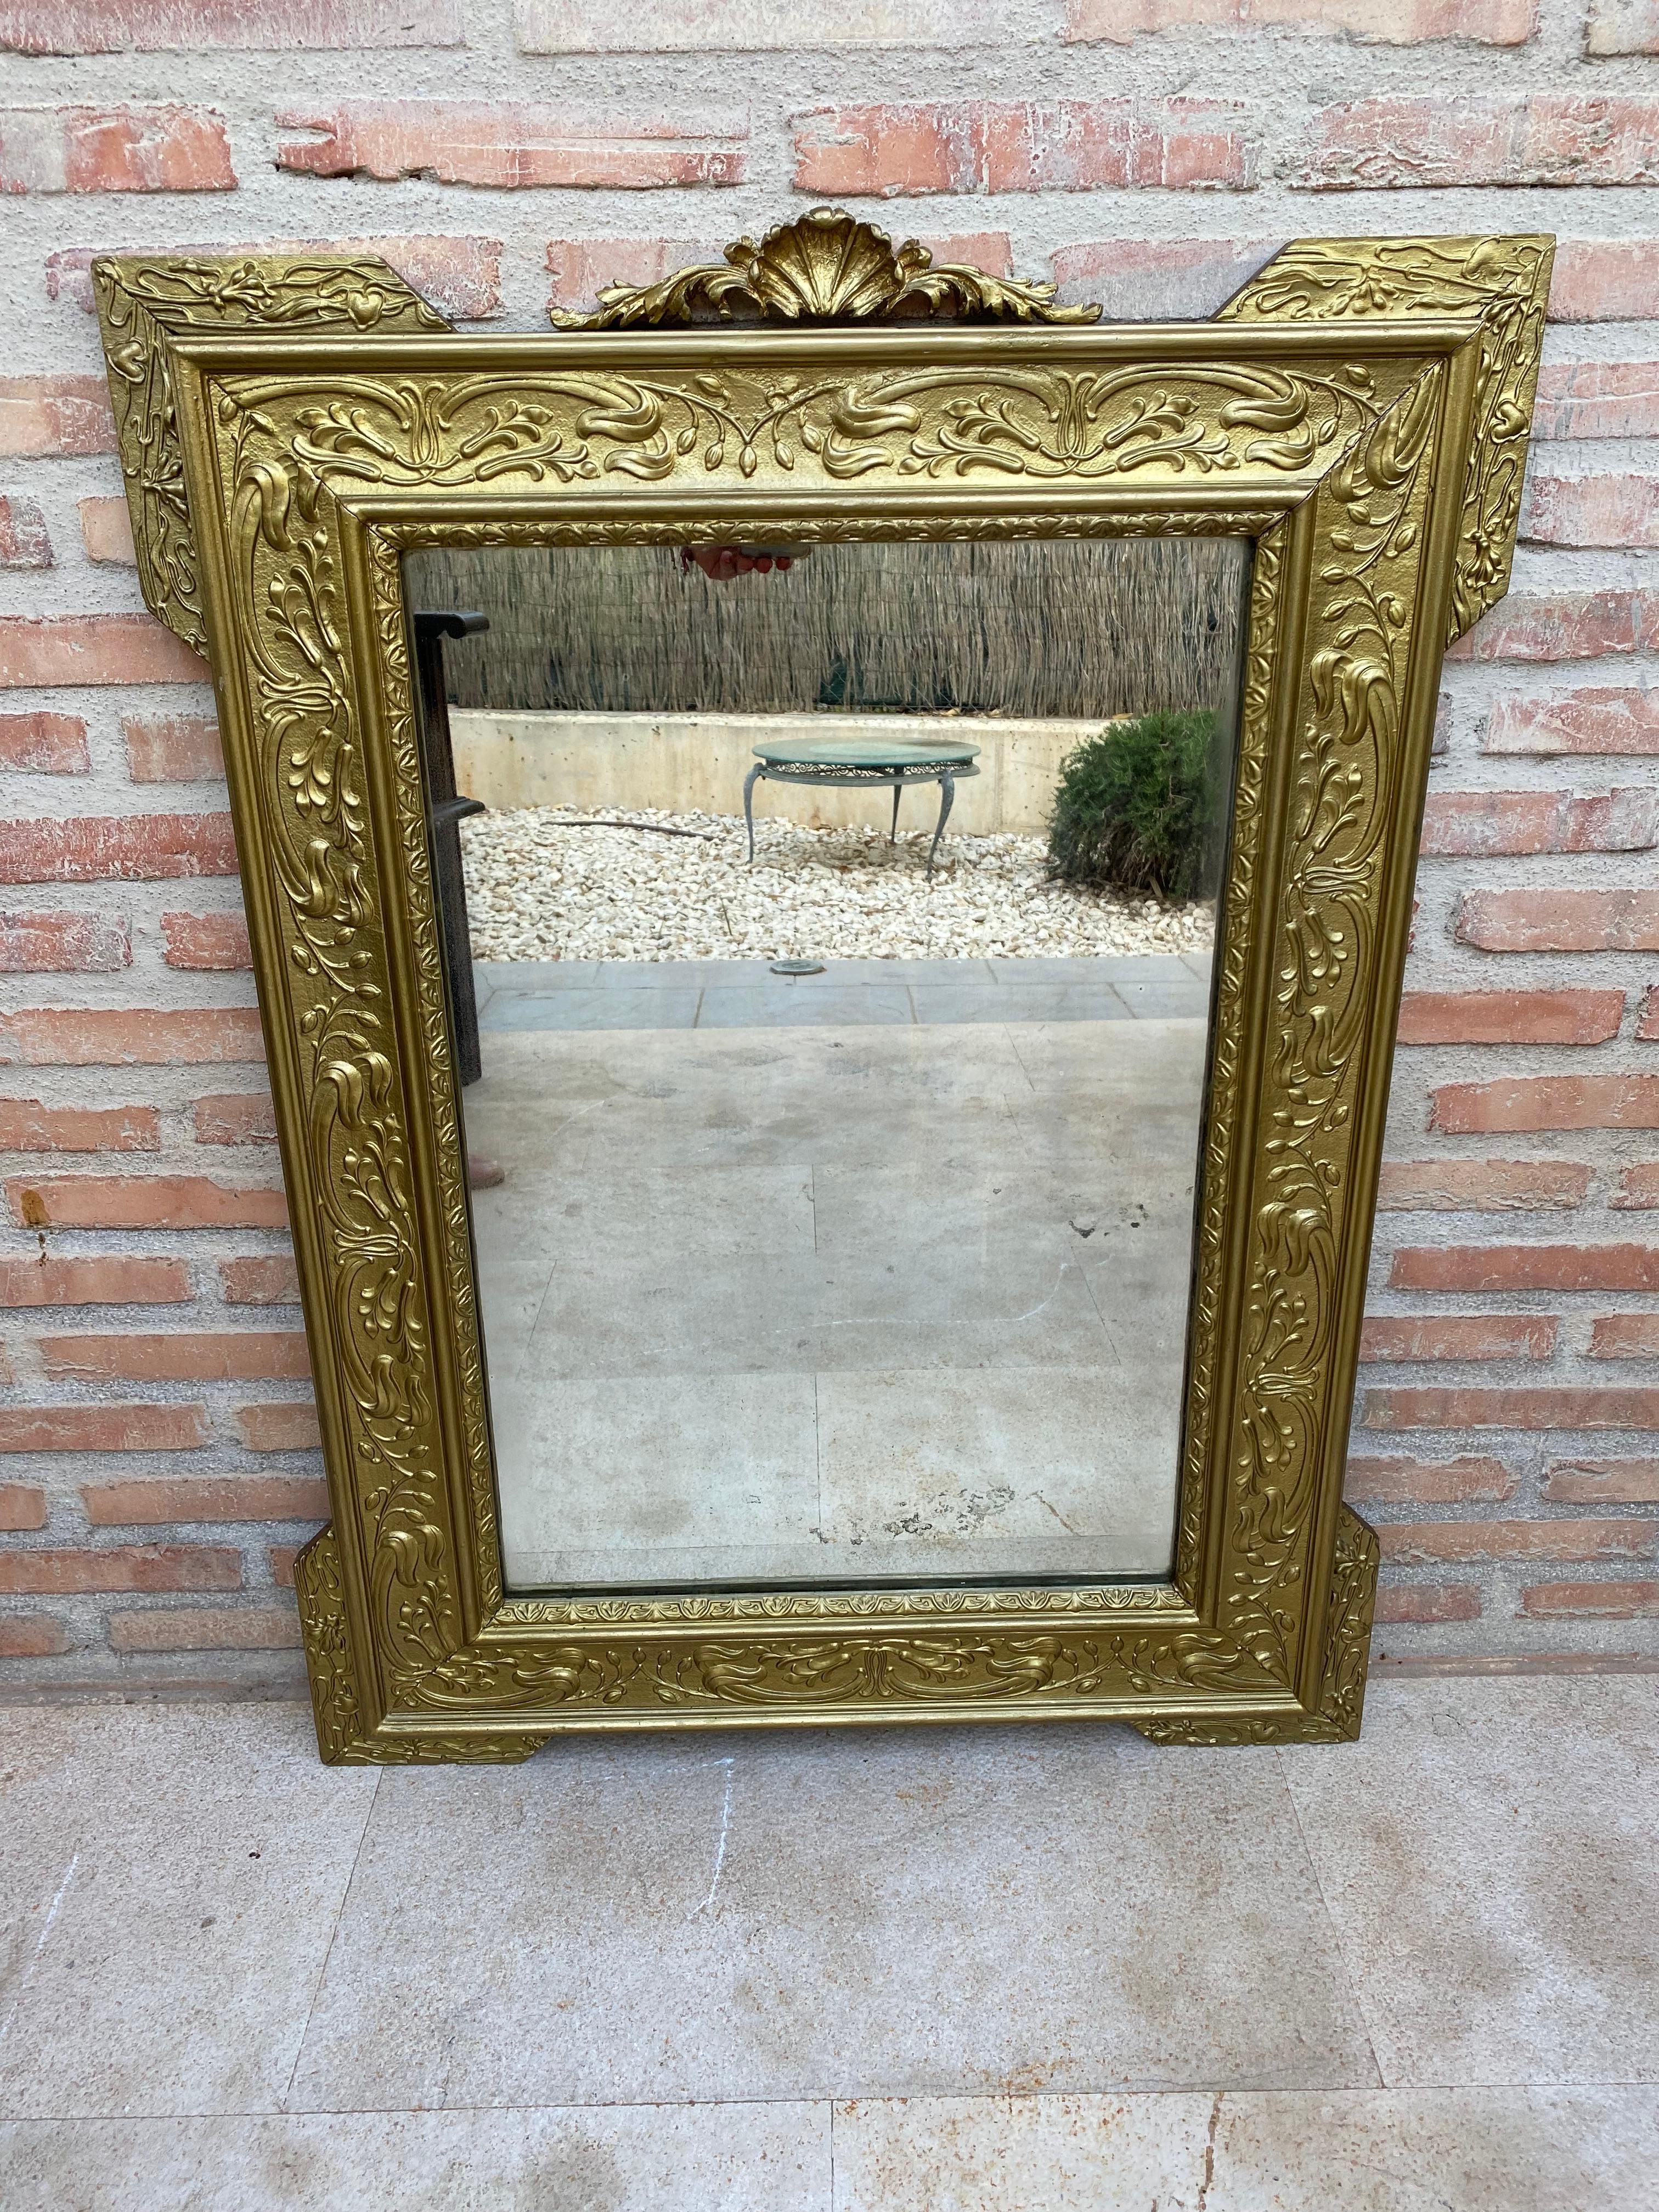 Spanish Colonial style handcrafted mirror. Rectangular hand carved wooden structure with gold foiled finish, Spain, 1960.

Design Period	1960 to 1969
Year	1960
Production Period	1960 to 1969
Country of Manufacture	Spain
Style	Spanish